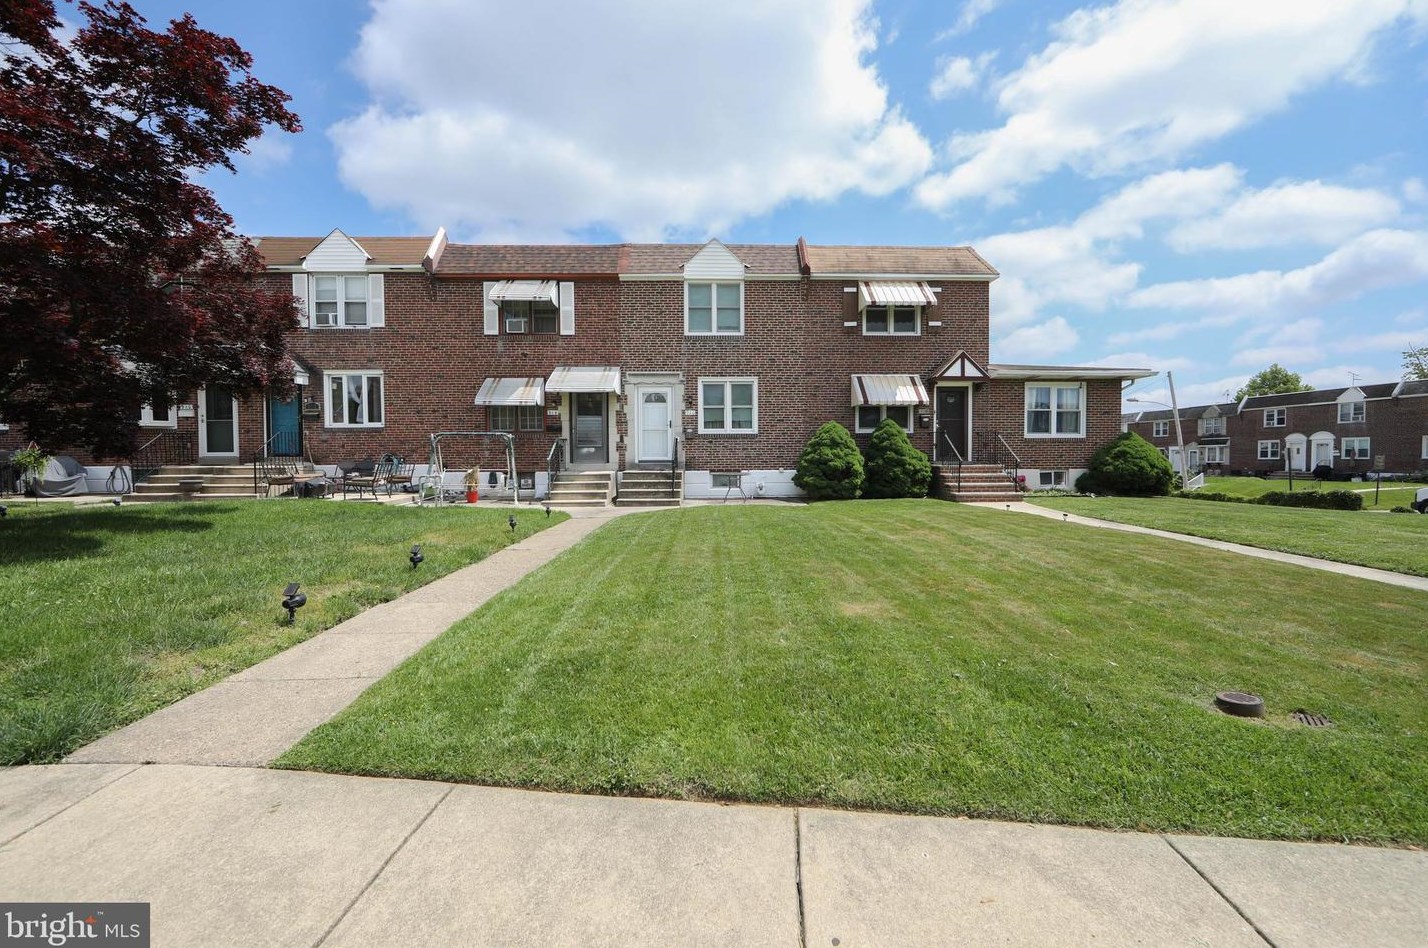 916 Maple Ave, Manor, PA 19036